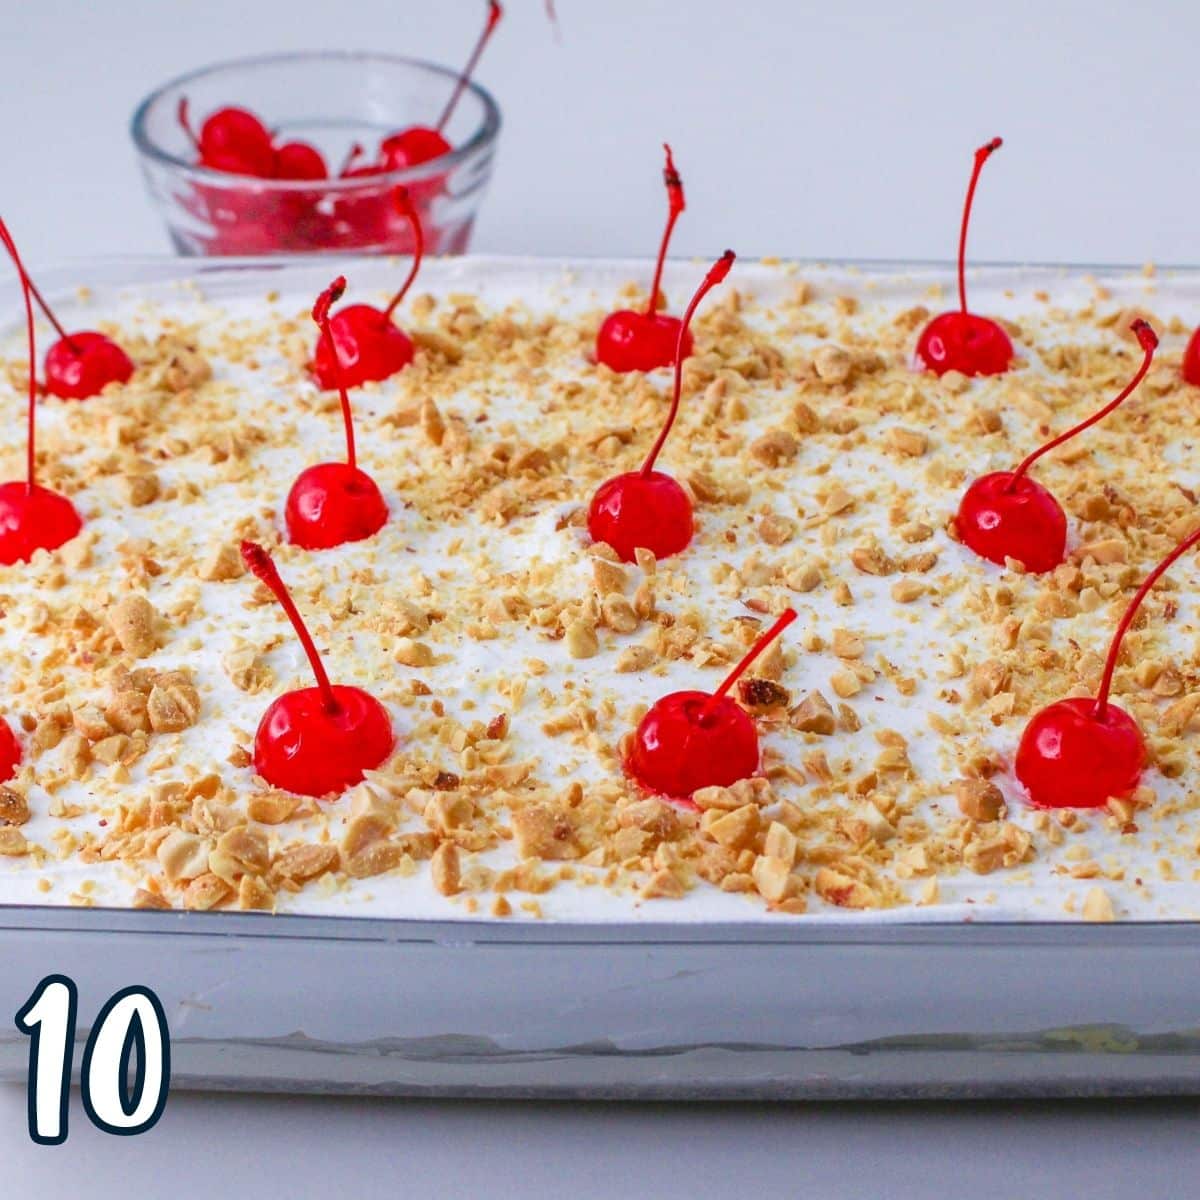 Crushed peanuts and a maraschino cherries as the final layer of the banana split cake. 